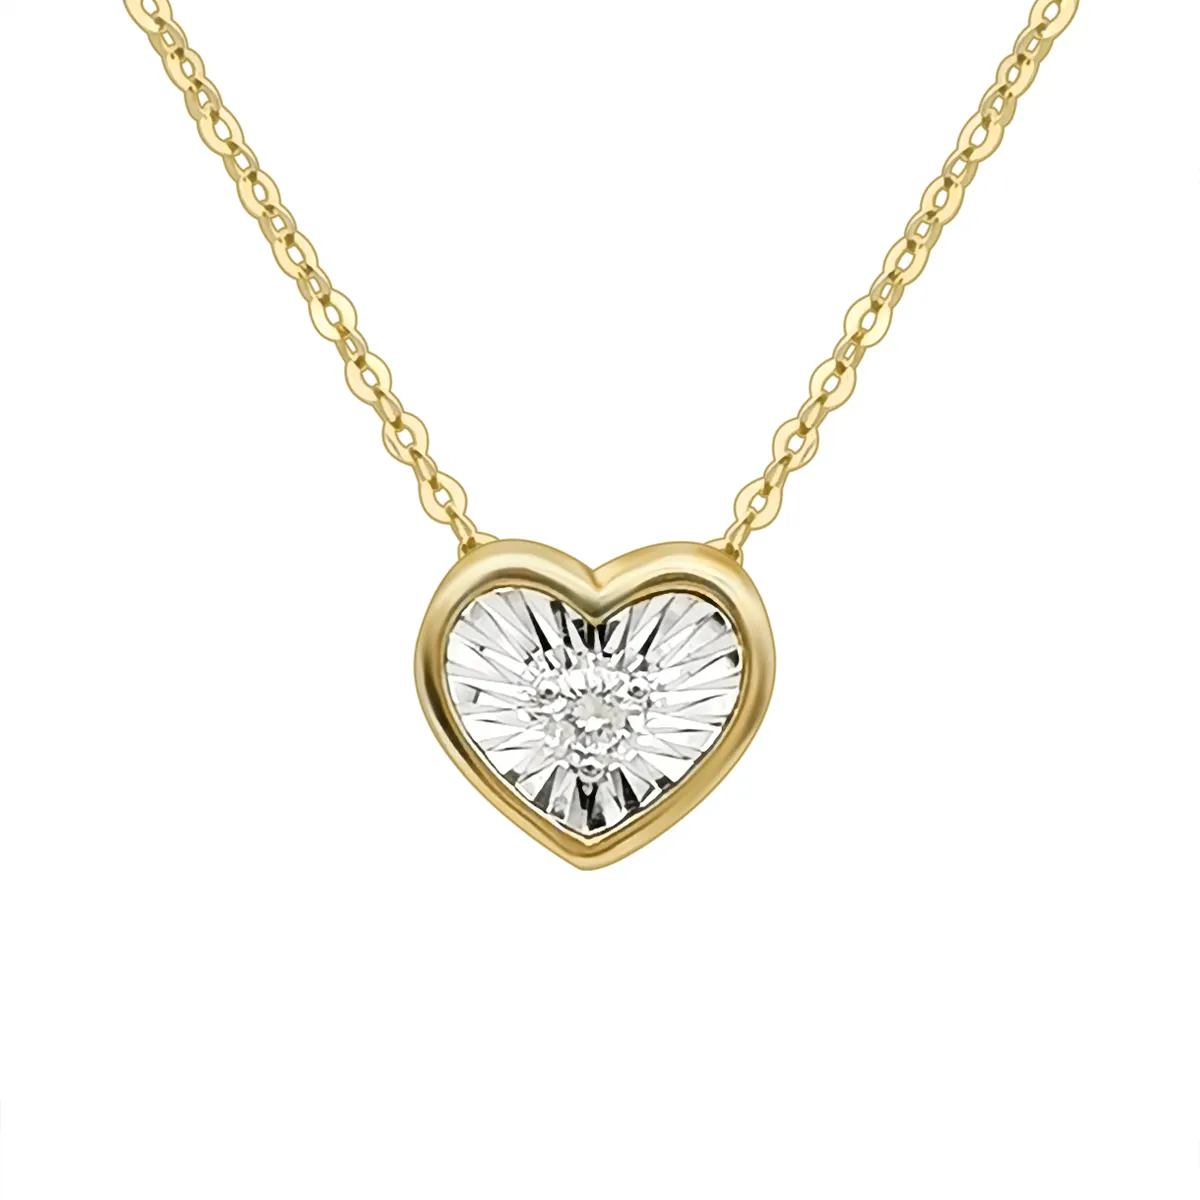 Real Diamond Pendant Heart Necklace Jewelry Necklace Women Clover Jewelry Wholesale China 18k Yellow Gold Chain Necklaces 2 Pcs